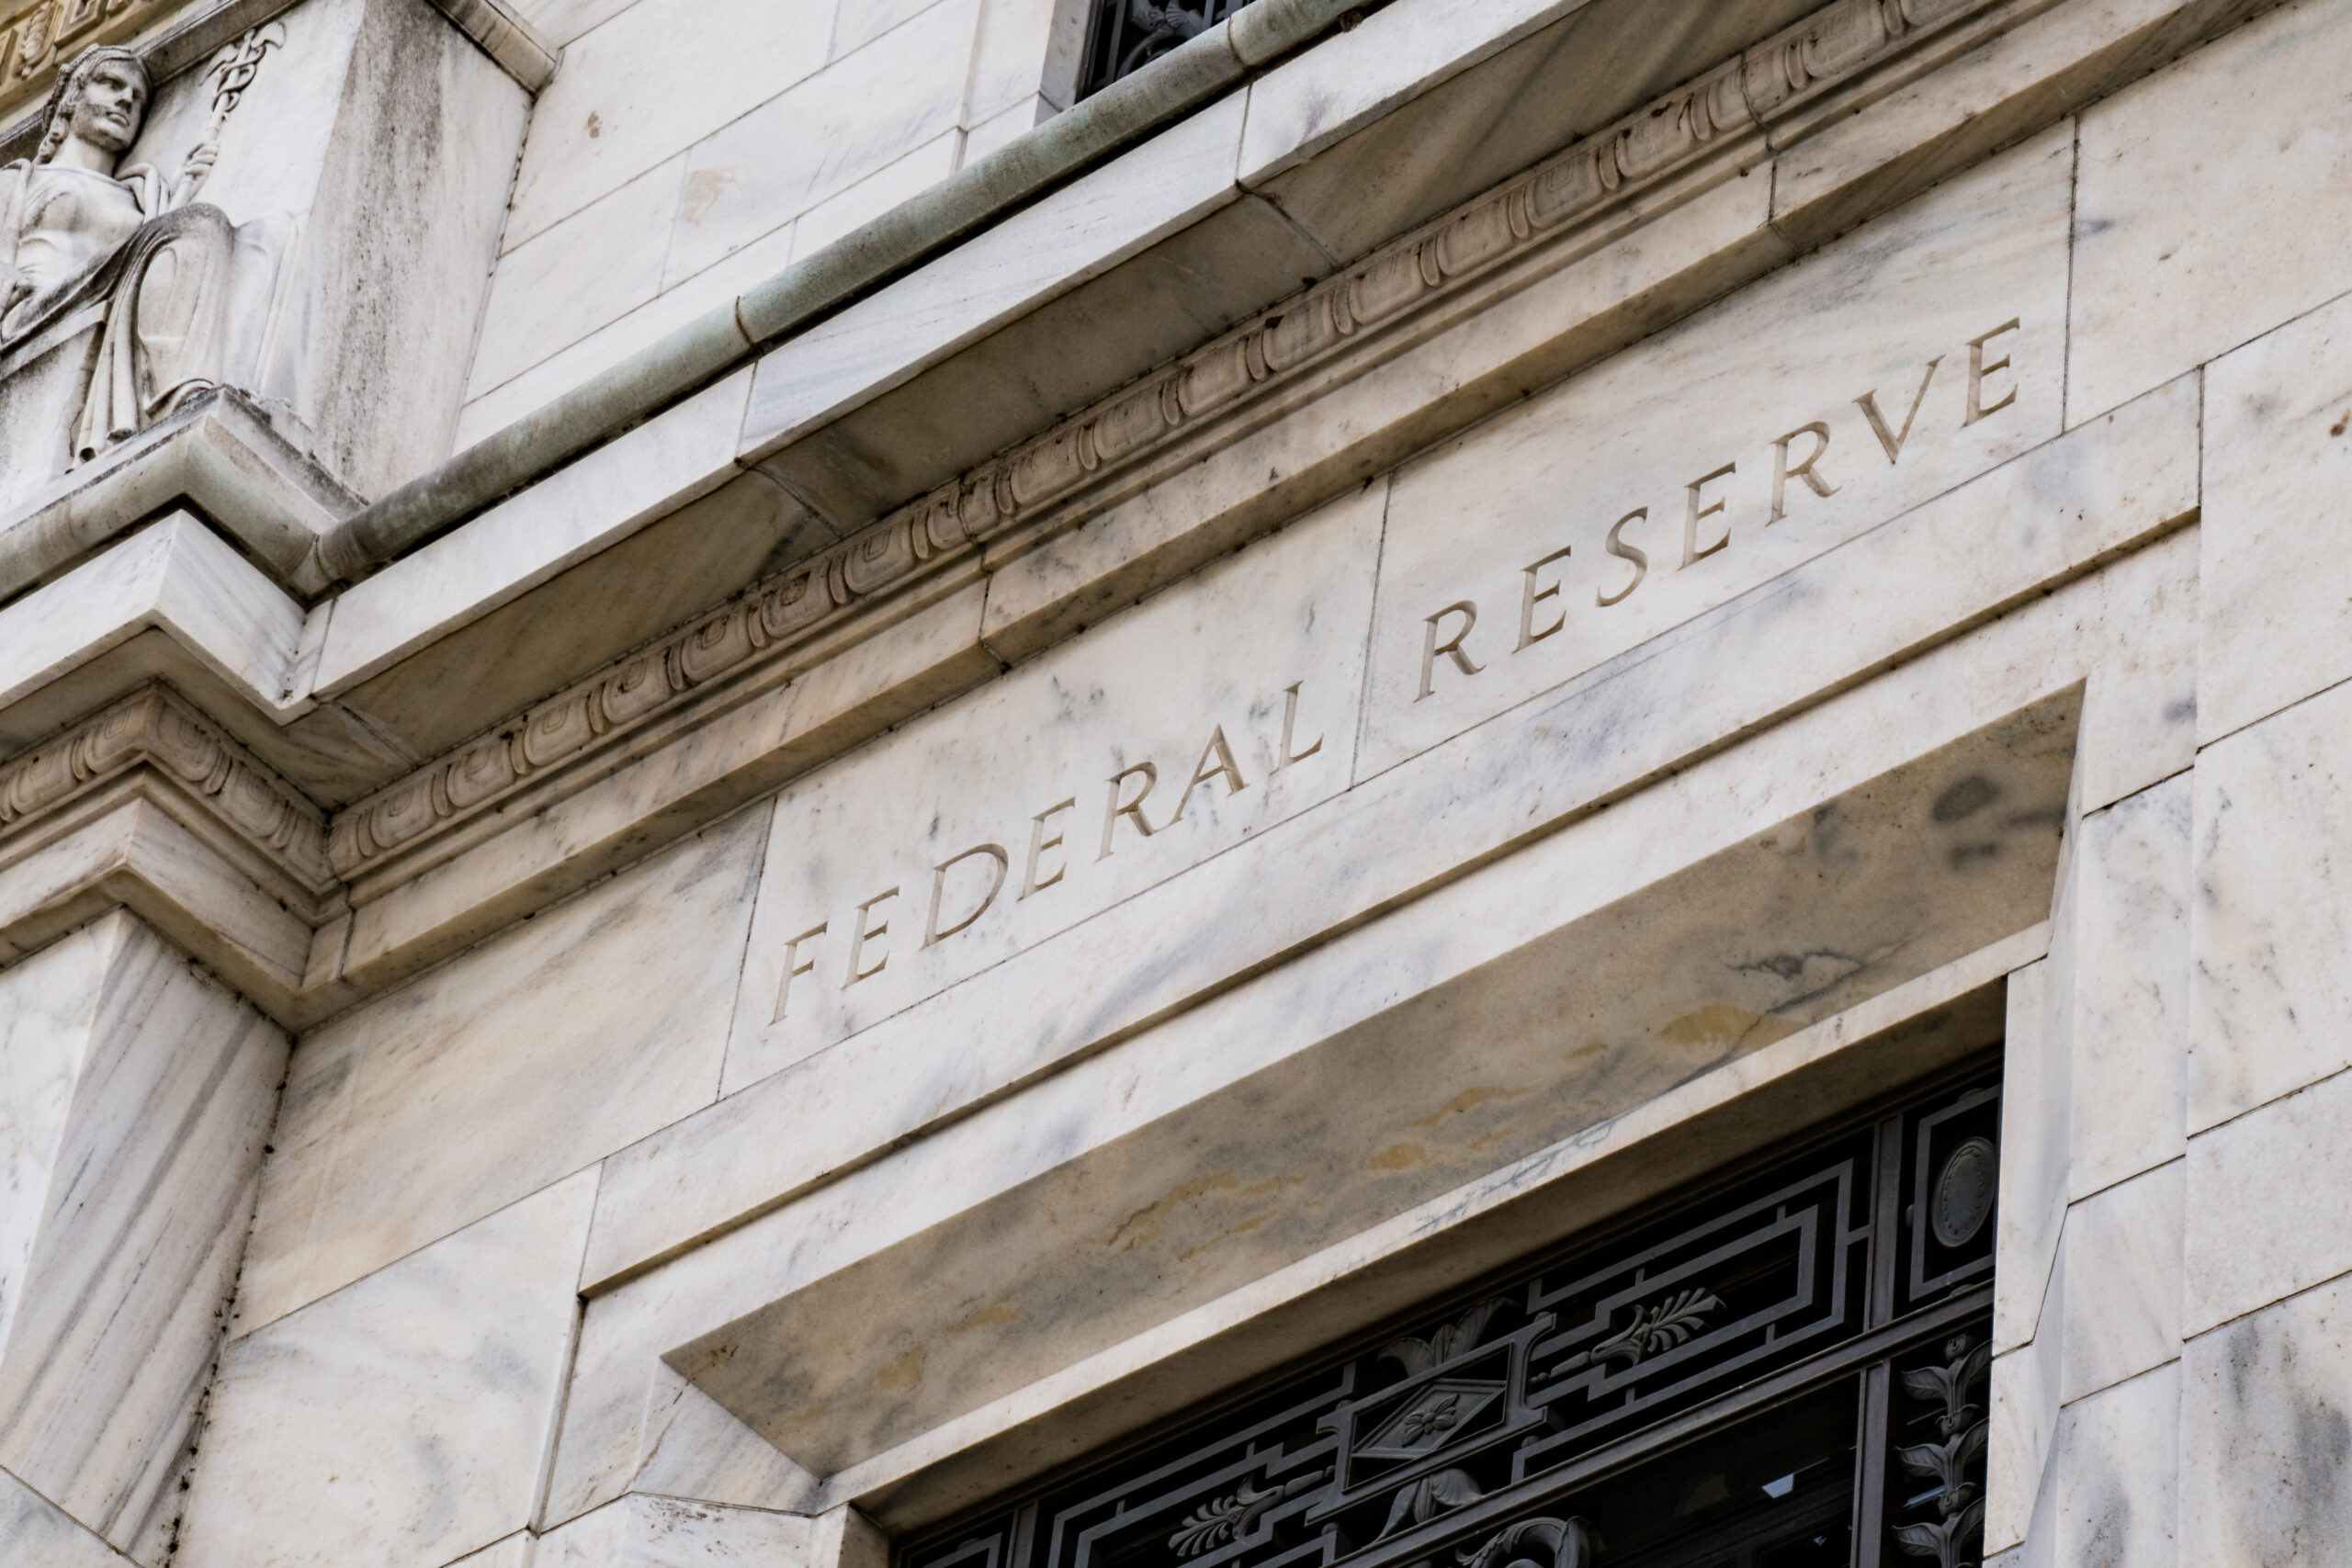 Facade on the Federal Reserve Building in Washington, DC